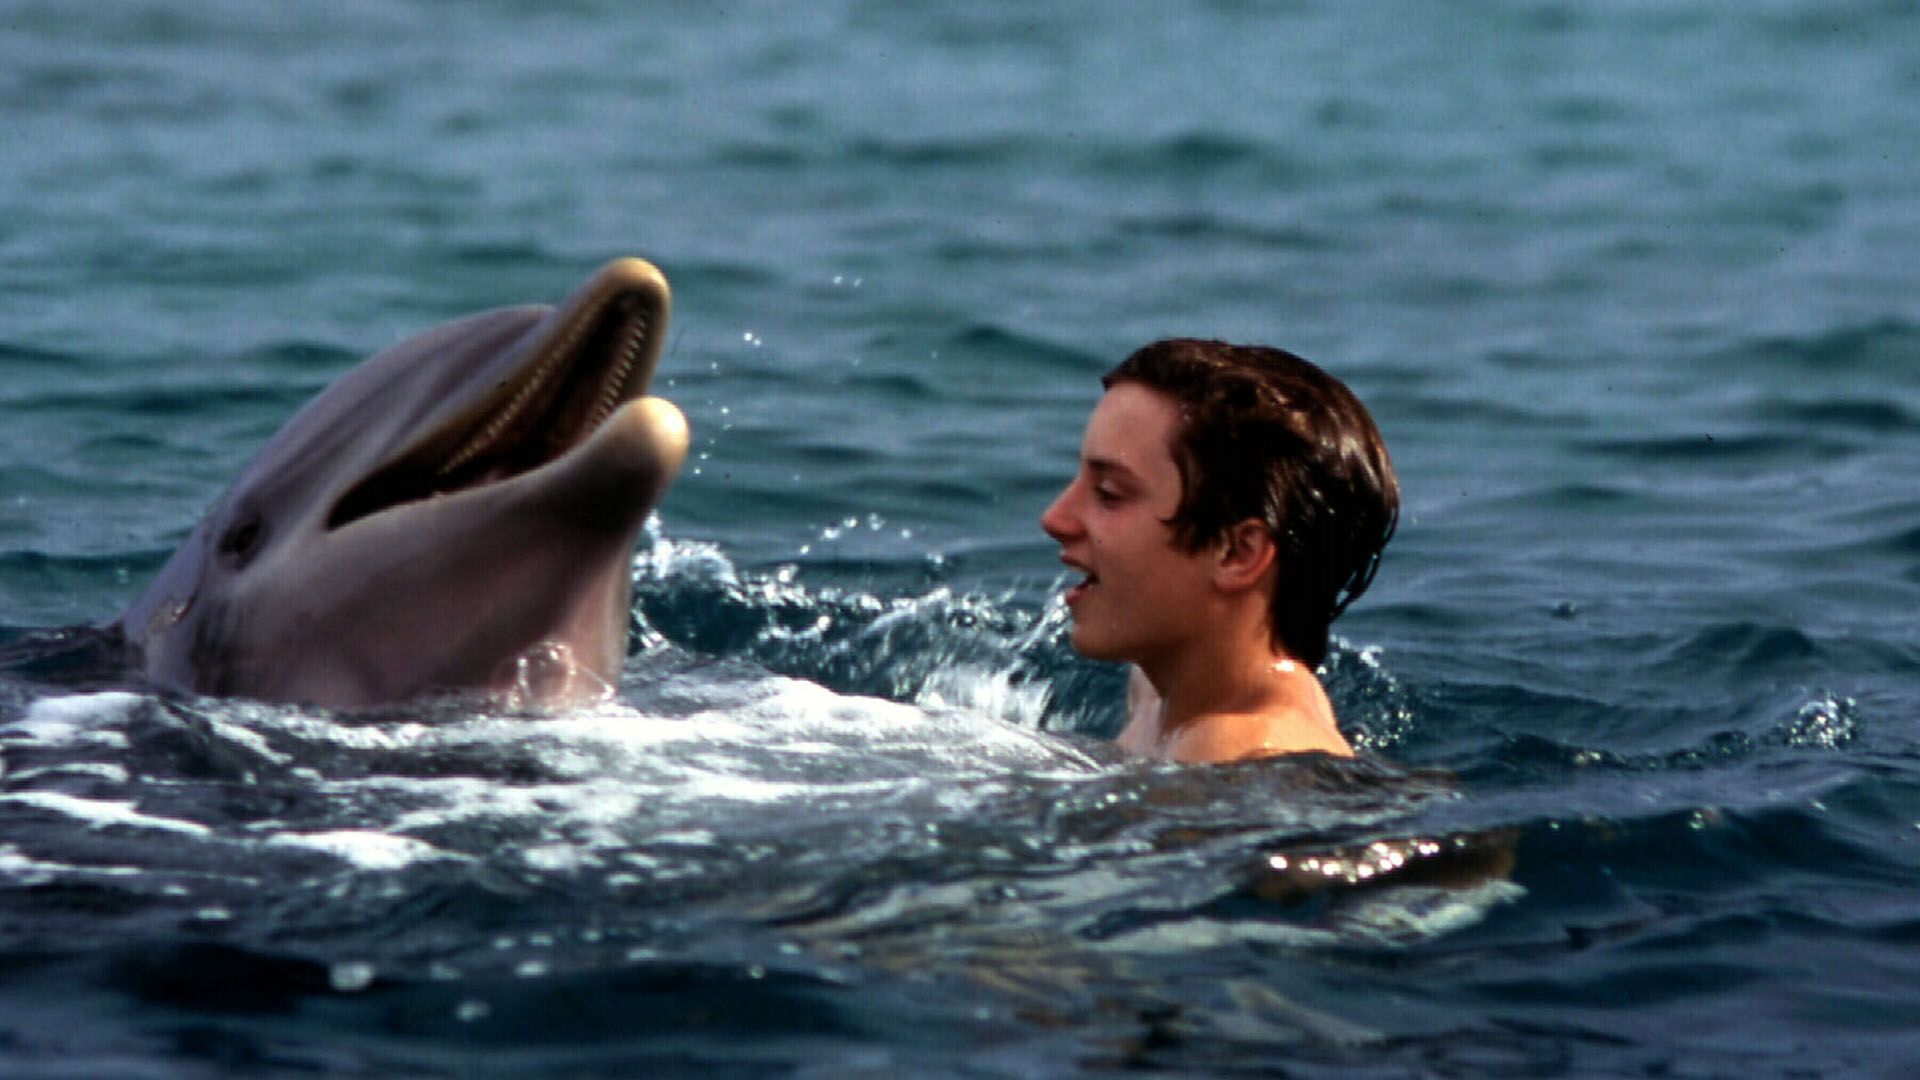 <p>                     A fun kids’ movie from 1963 about a boy, Sandy, and a dolphin, Flipper, whom he nurses back from injury. Sandy is distraught when, having saved Flipper by pulling out a spear, his father insists the dolphin be released. A grateful Flipper, however, returns the favor when Sandy is threatened by sharks.                    </p>